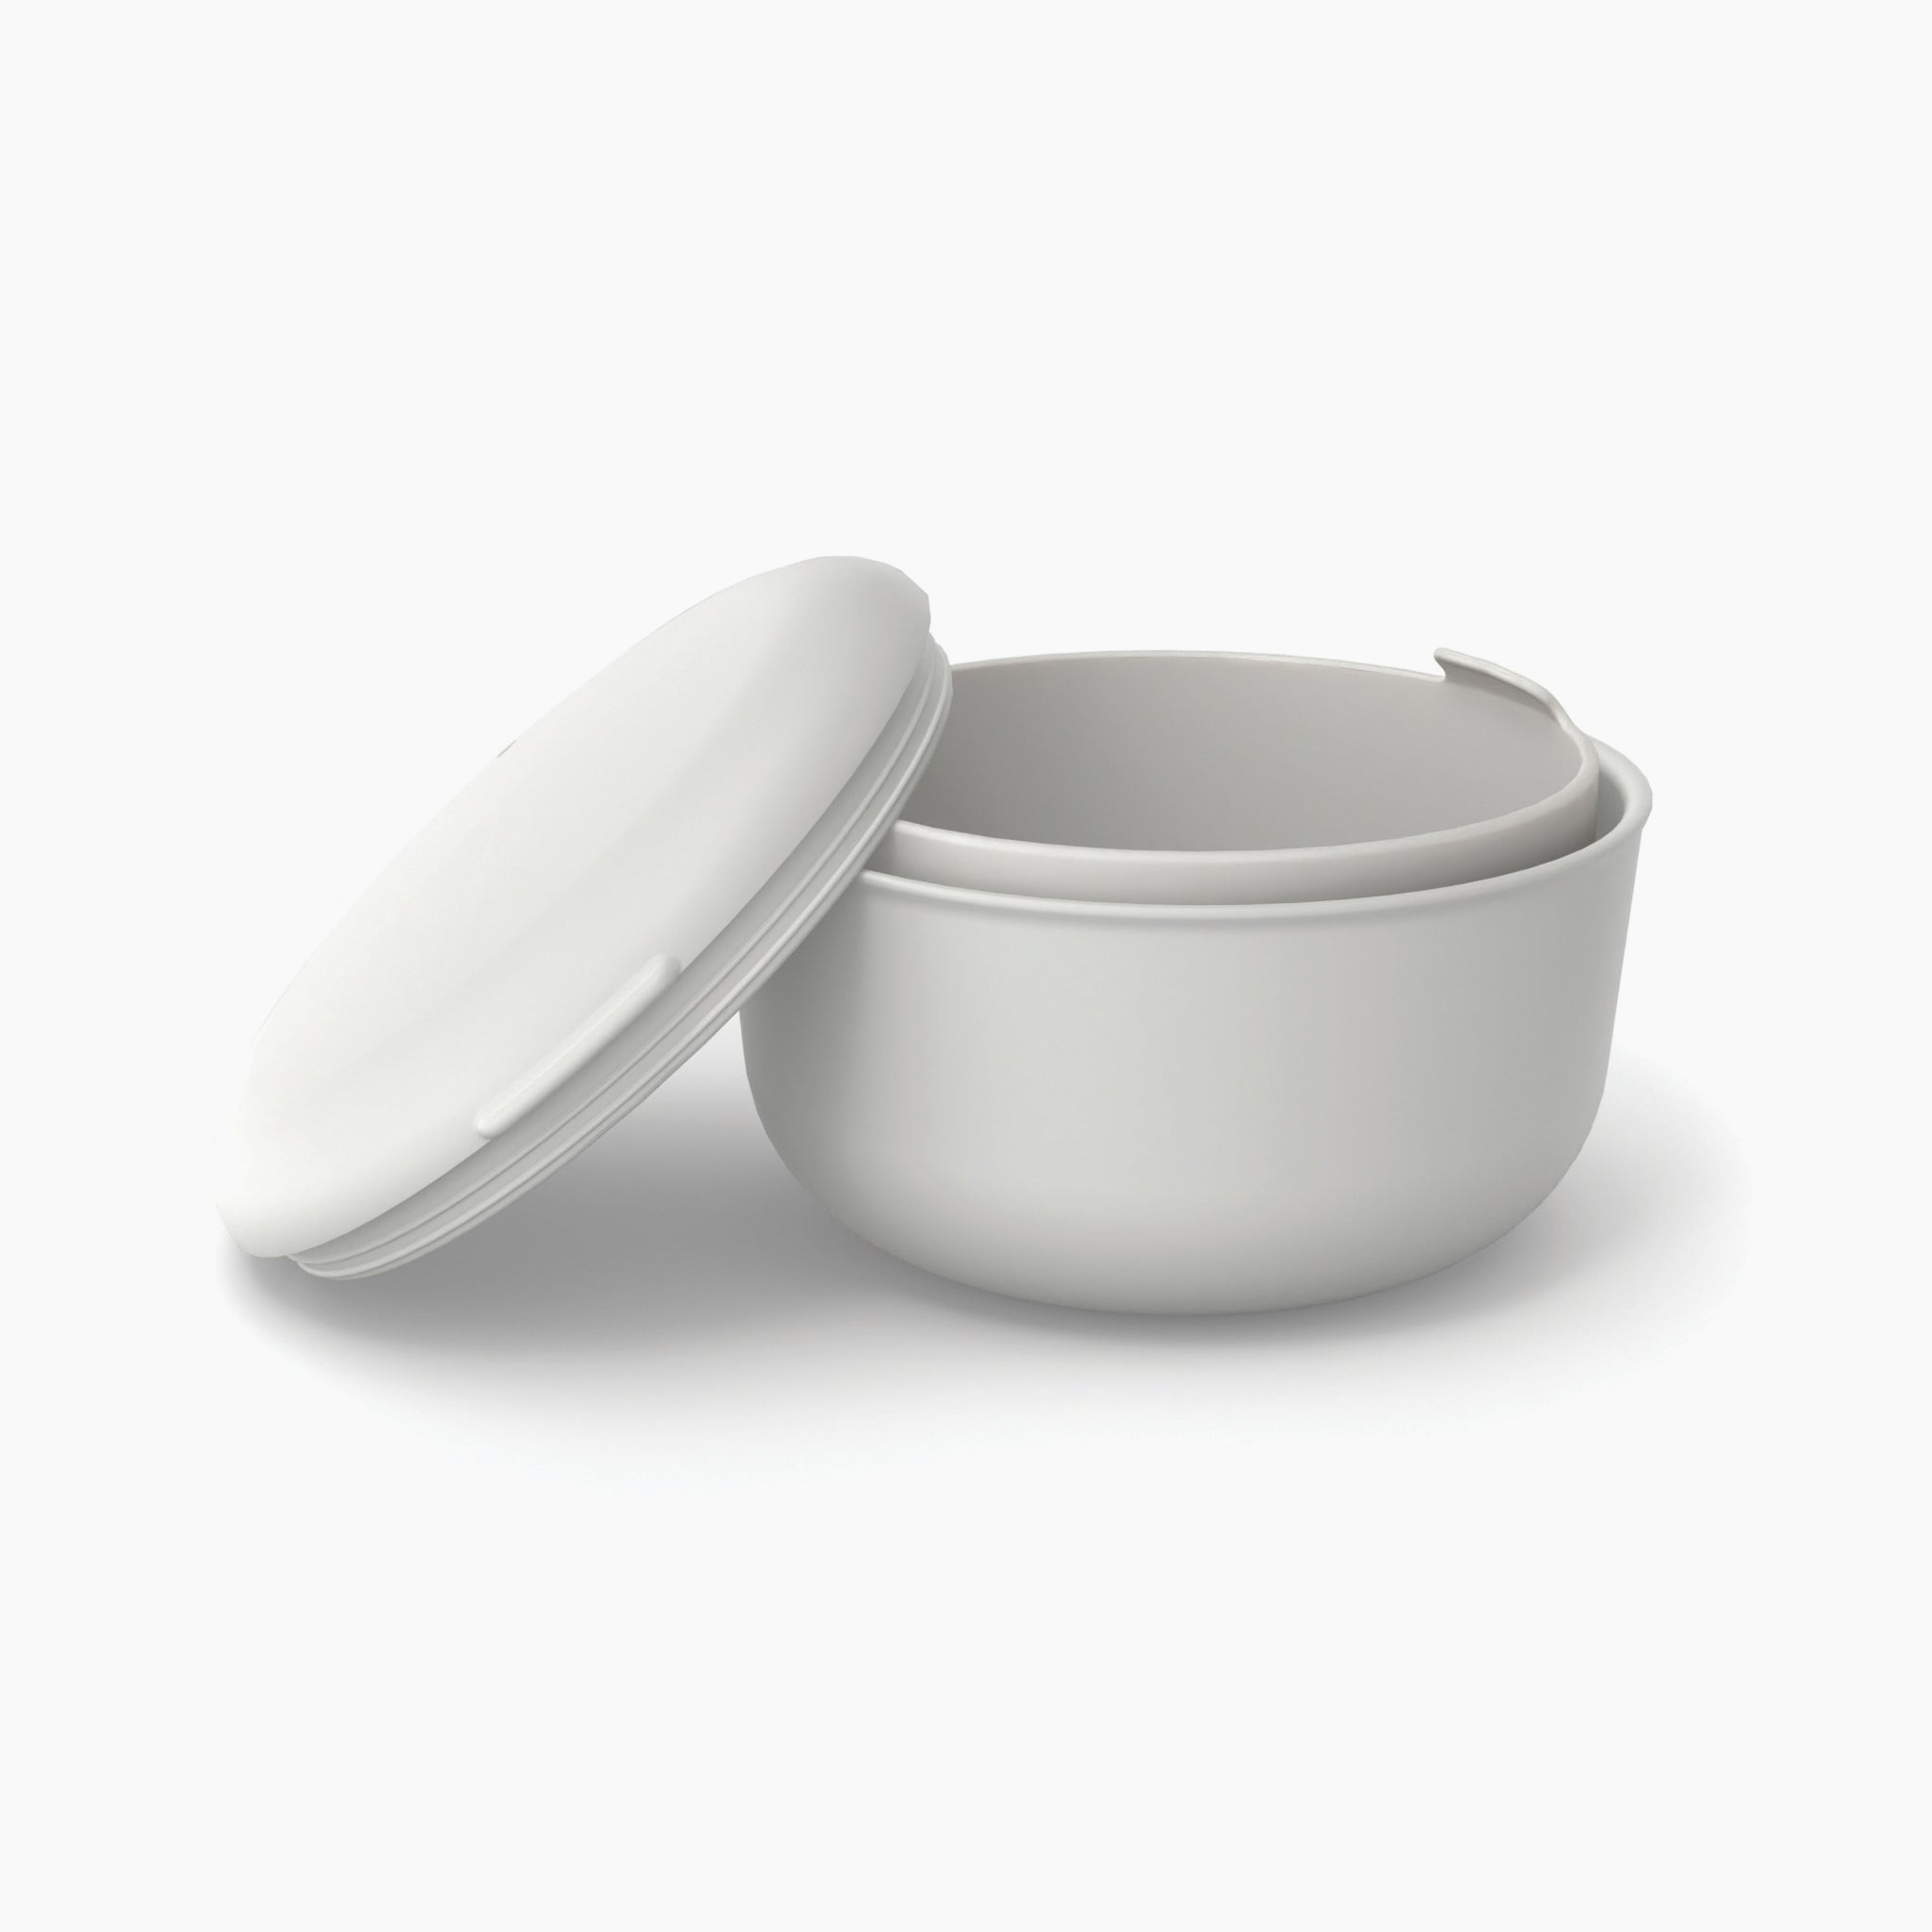 25 oz Lunch Set with heat-safe insert - Cloud